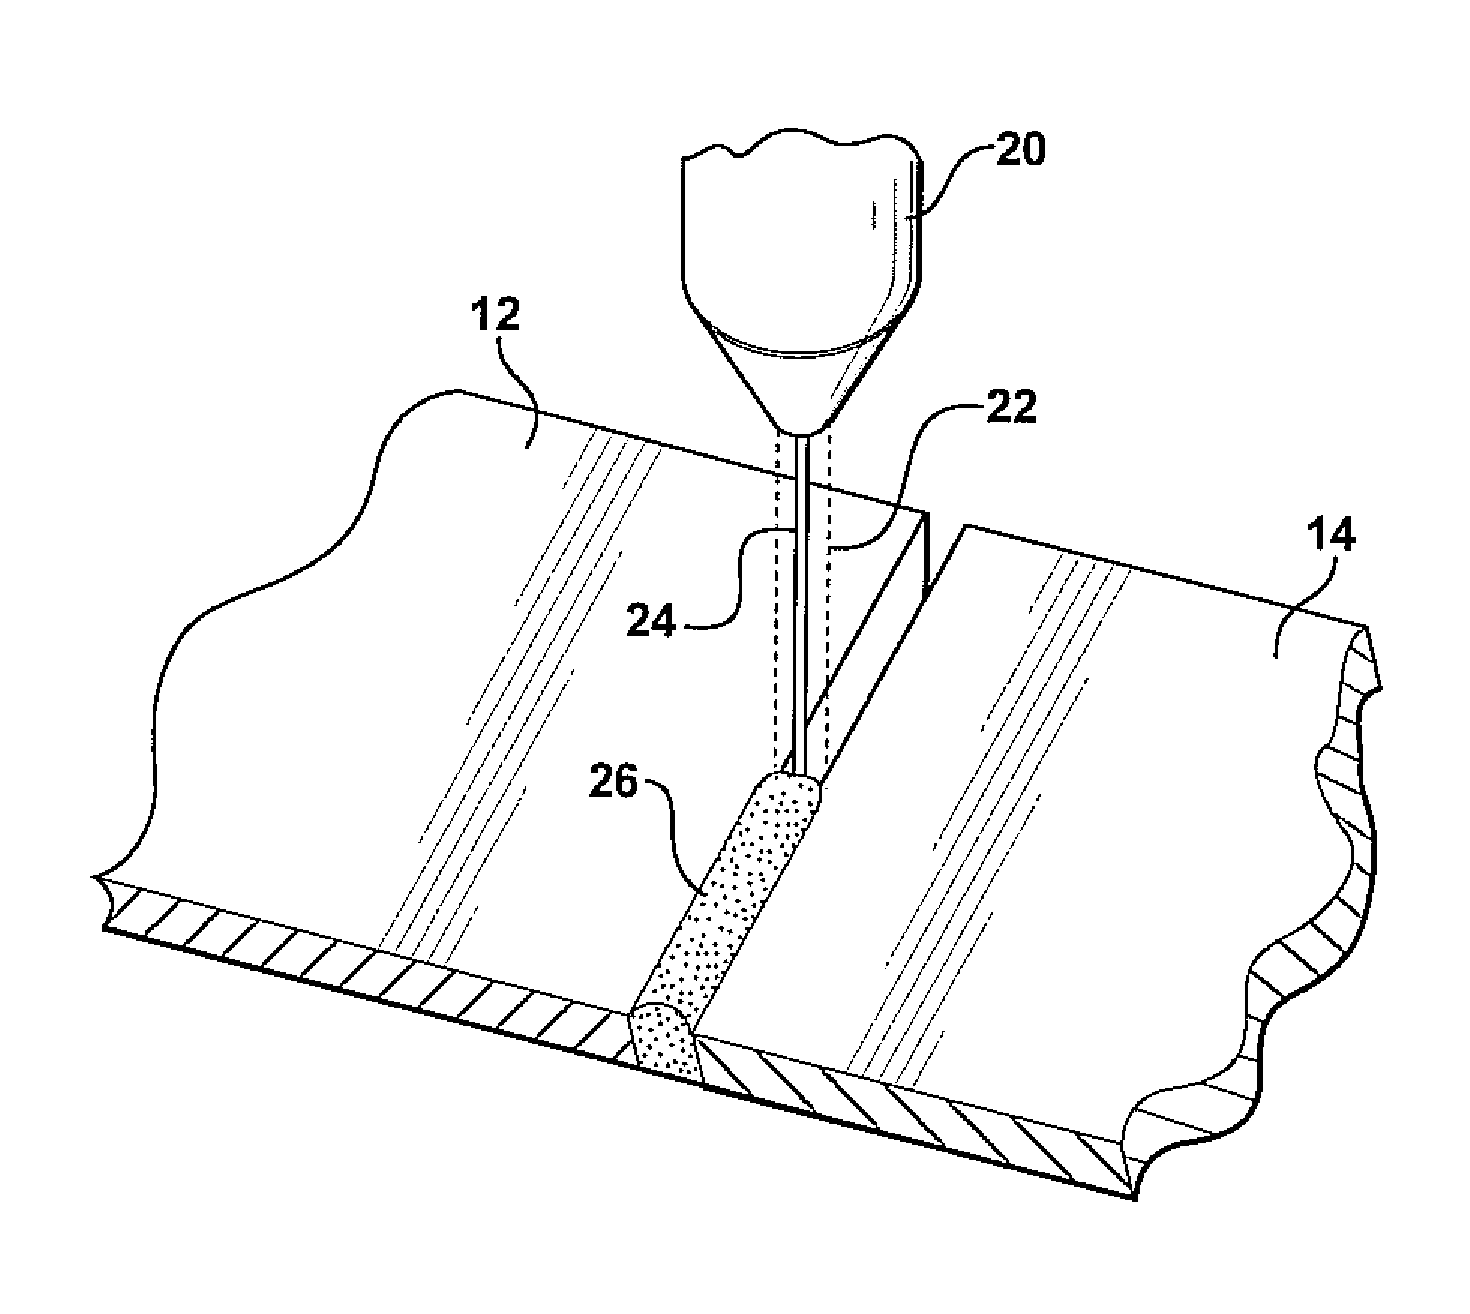 Method of manufacturing a welded metal panel having a high quality surface finish